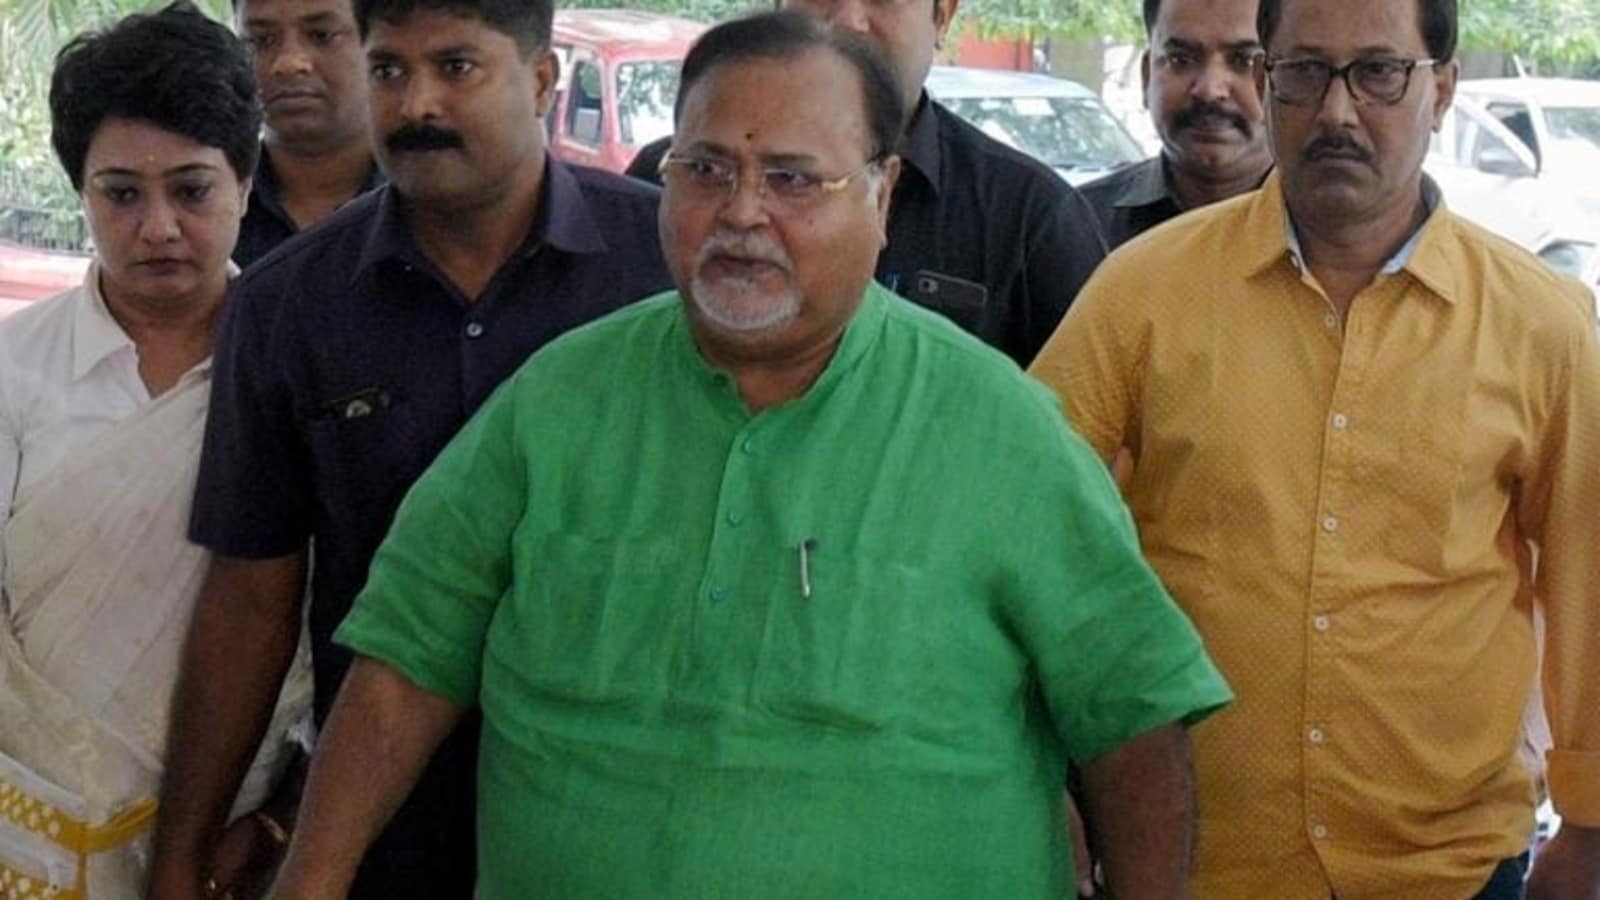 SSC Recruitment Scam, Minister Partha Chatterjee Arrested